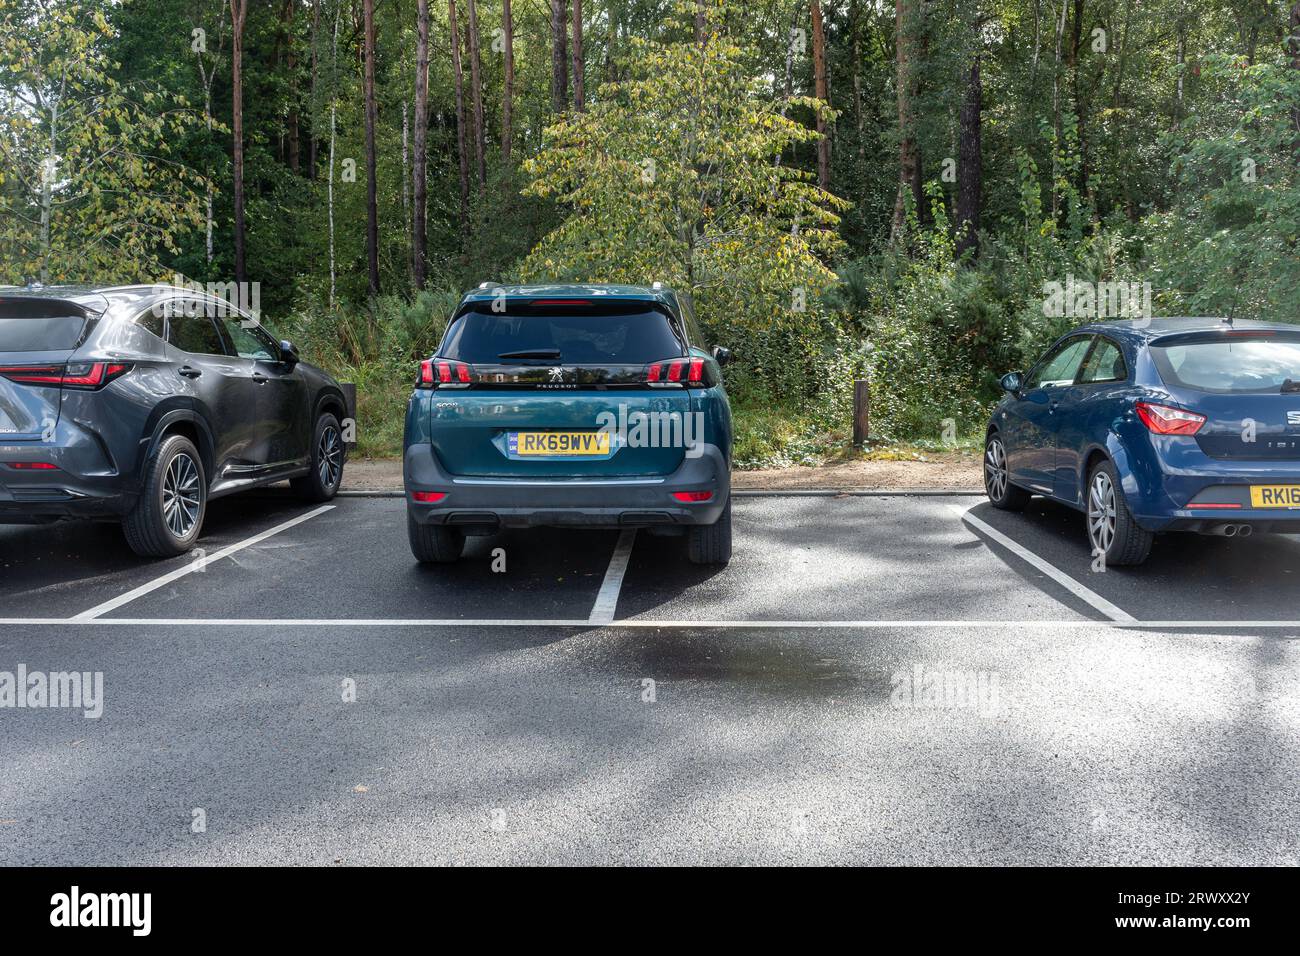 Inconsiderate parking, car parked on line taking up two car park spaces, UK Stock Photo